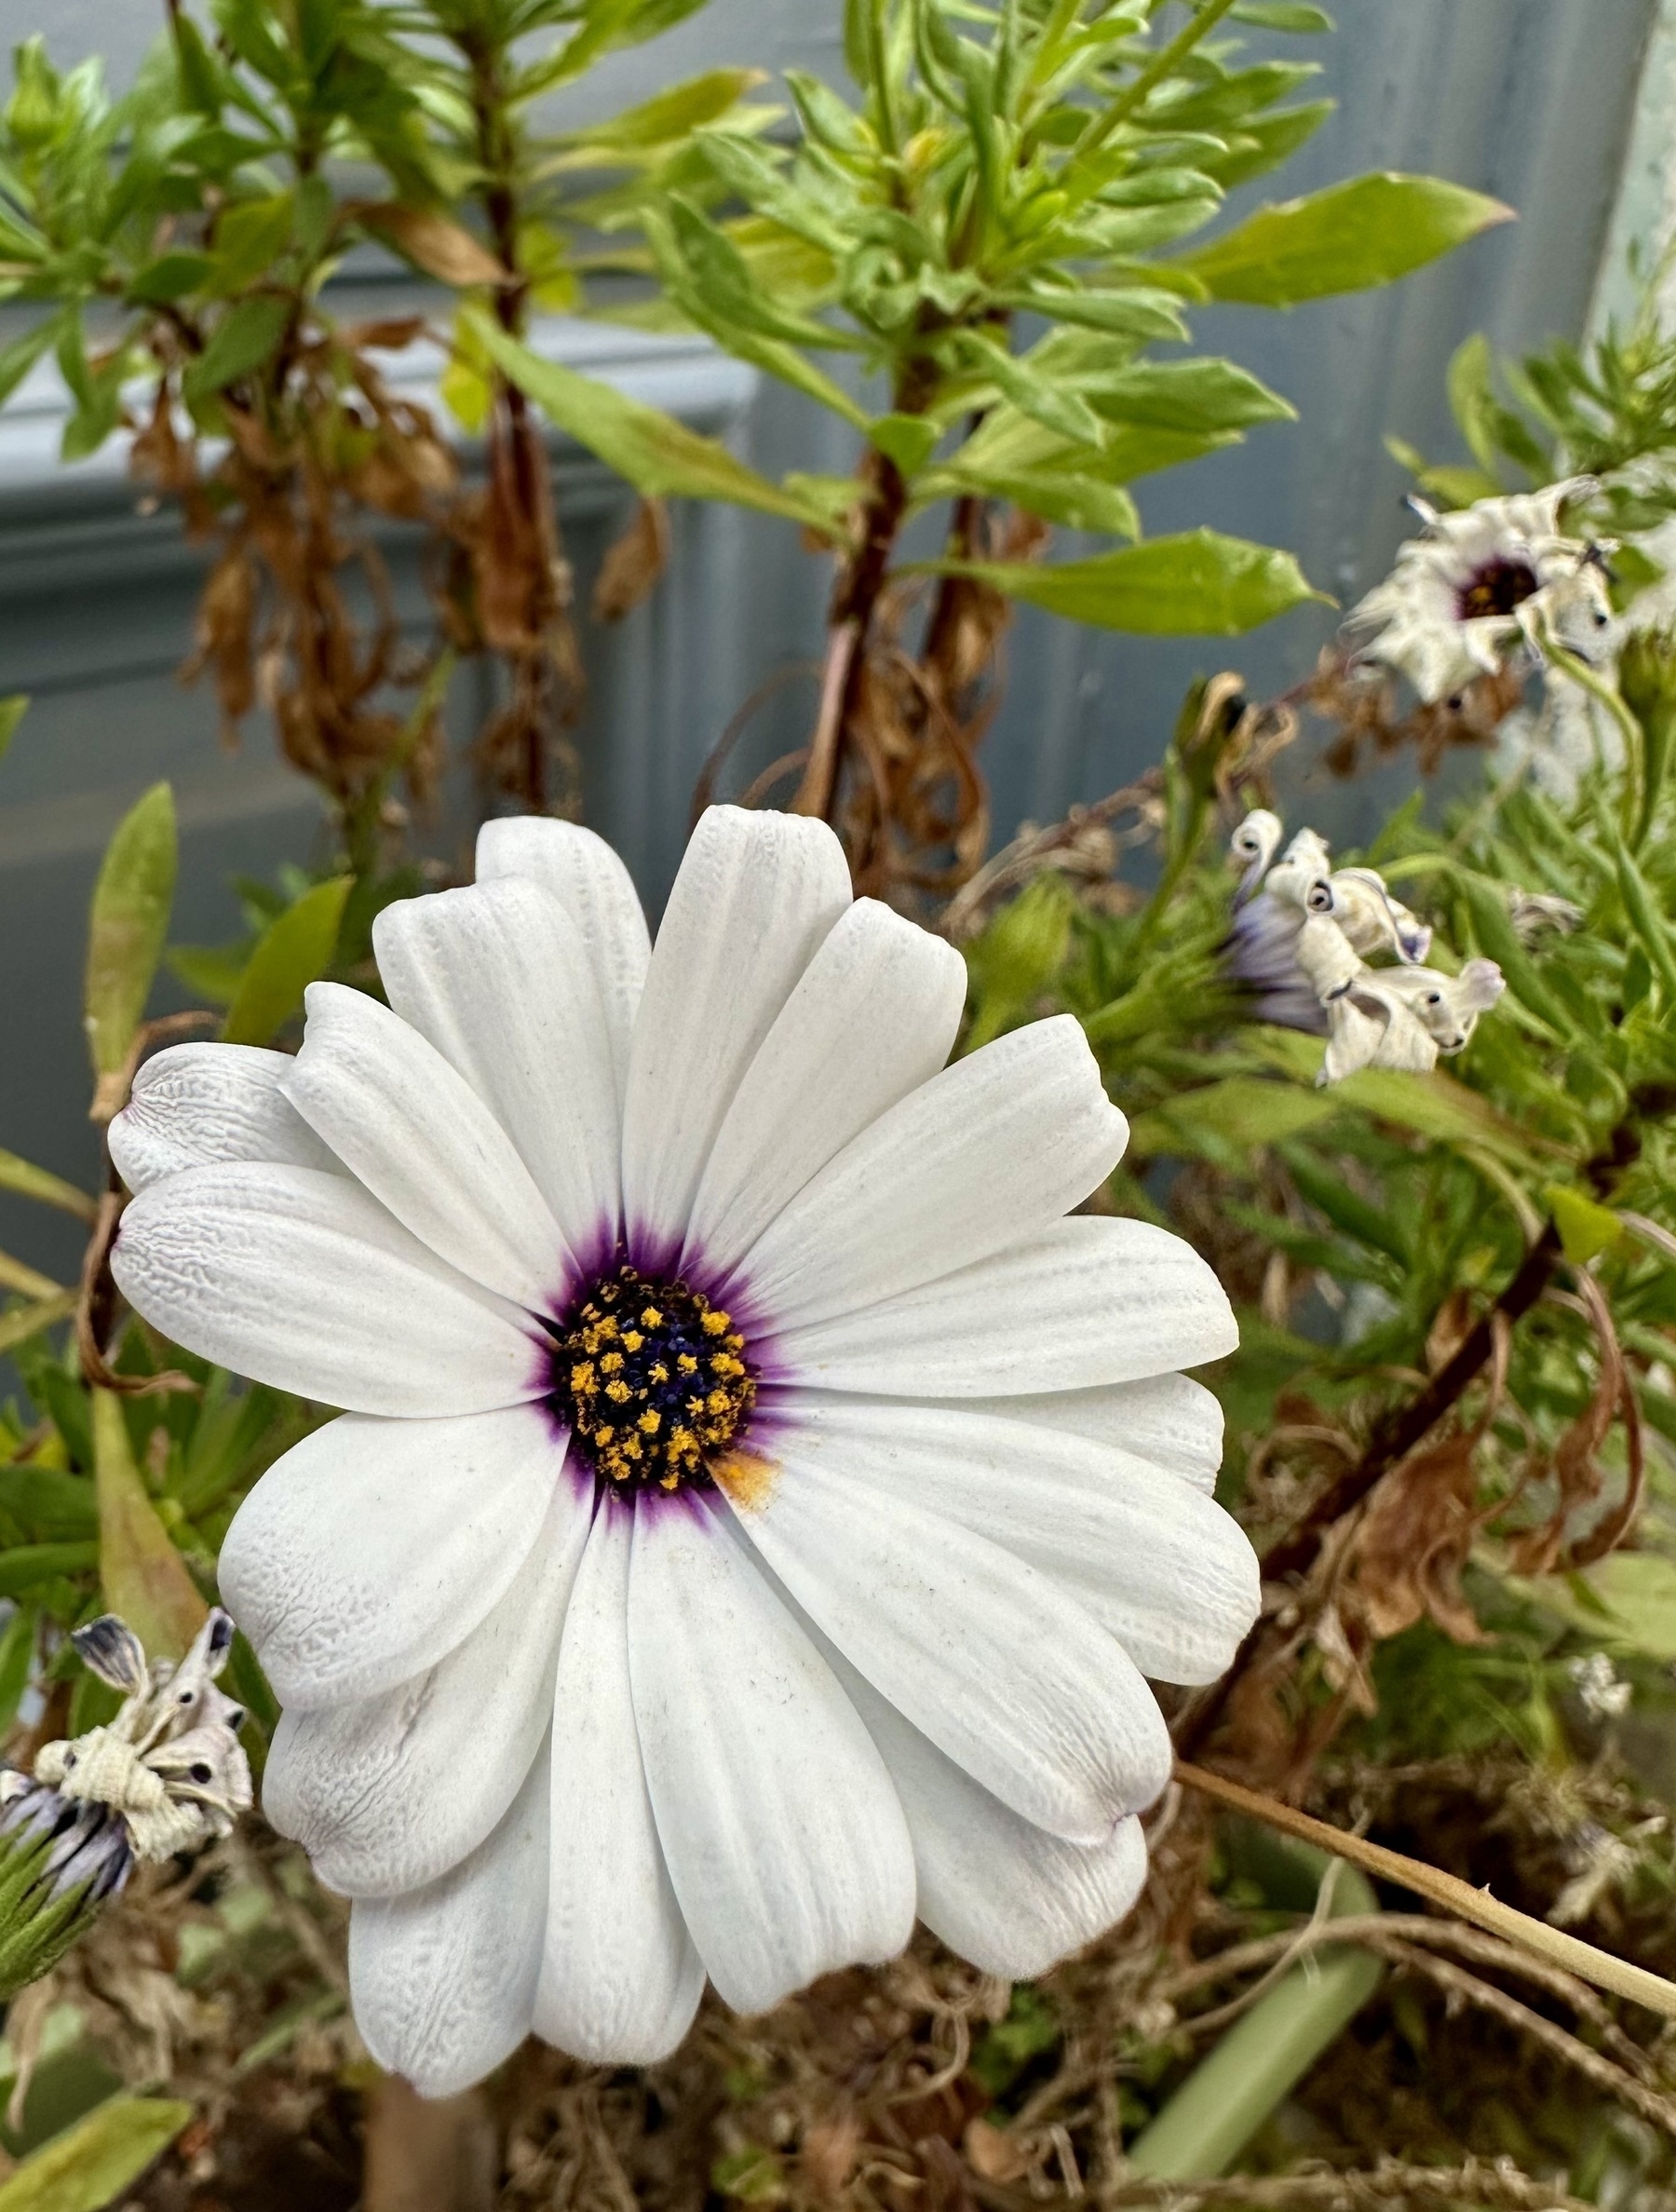 A large African daisy amongst some other plants.